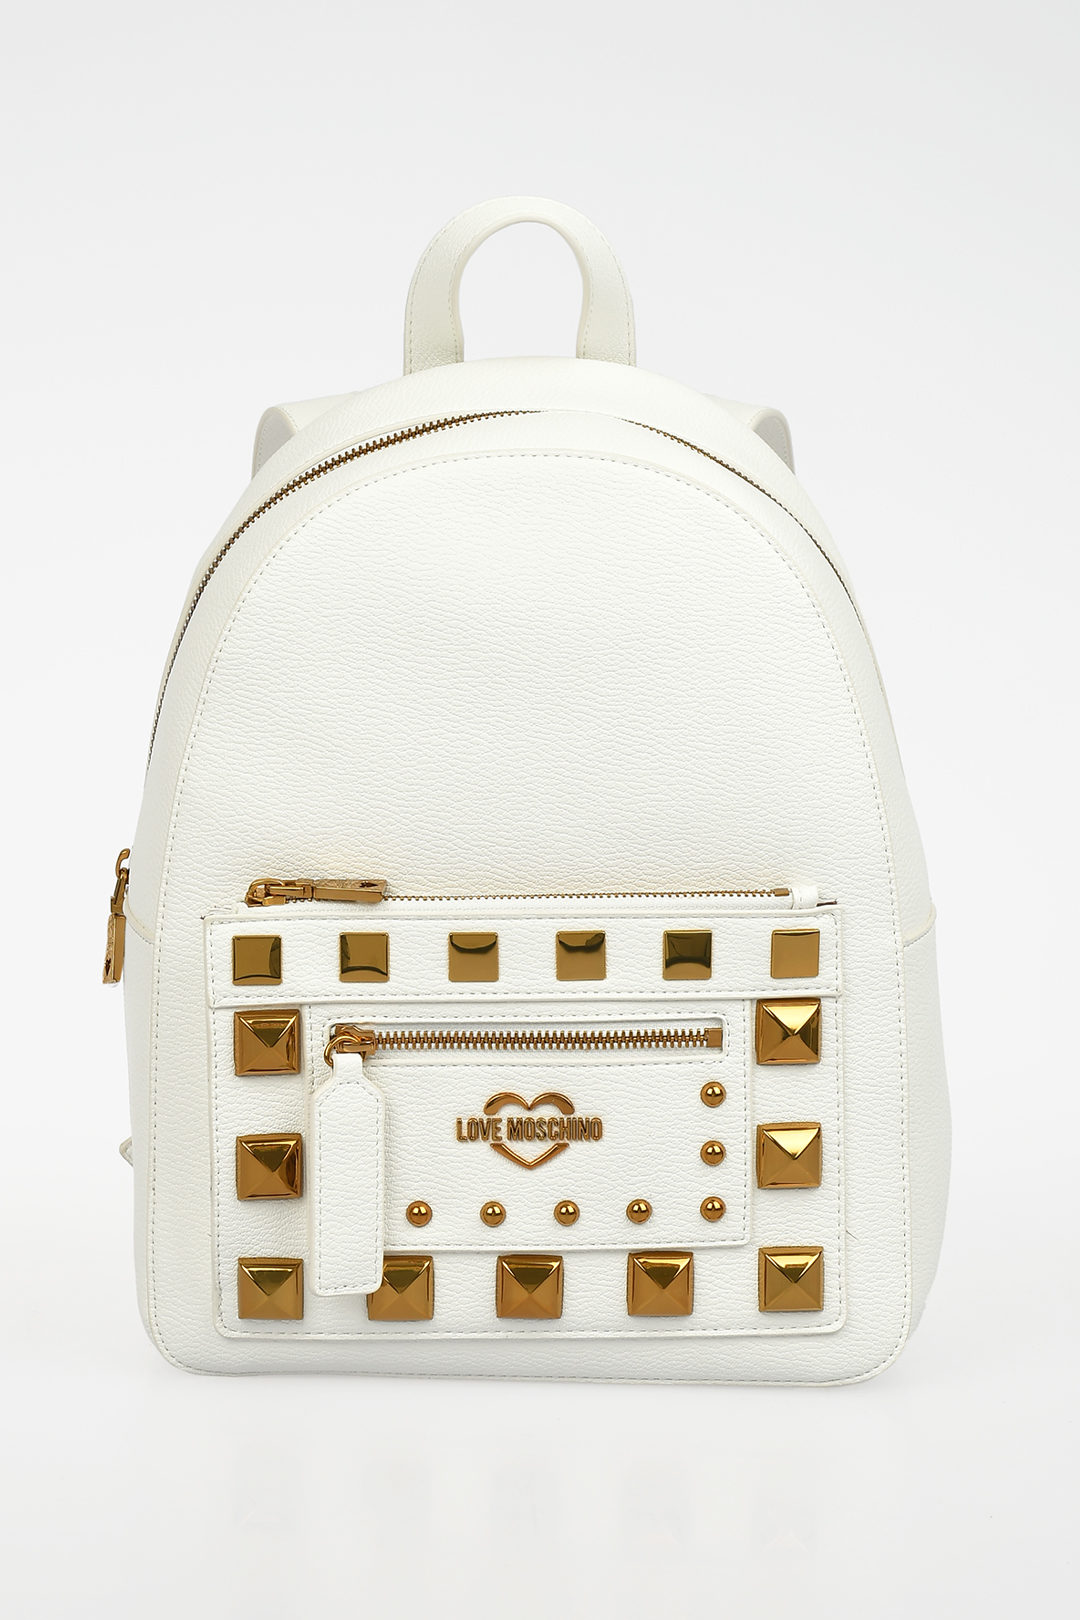 moschino bag outlet